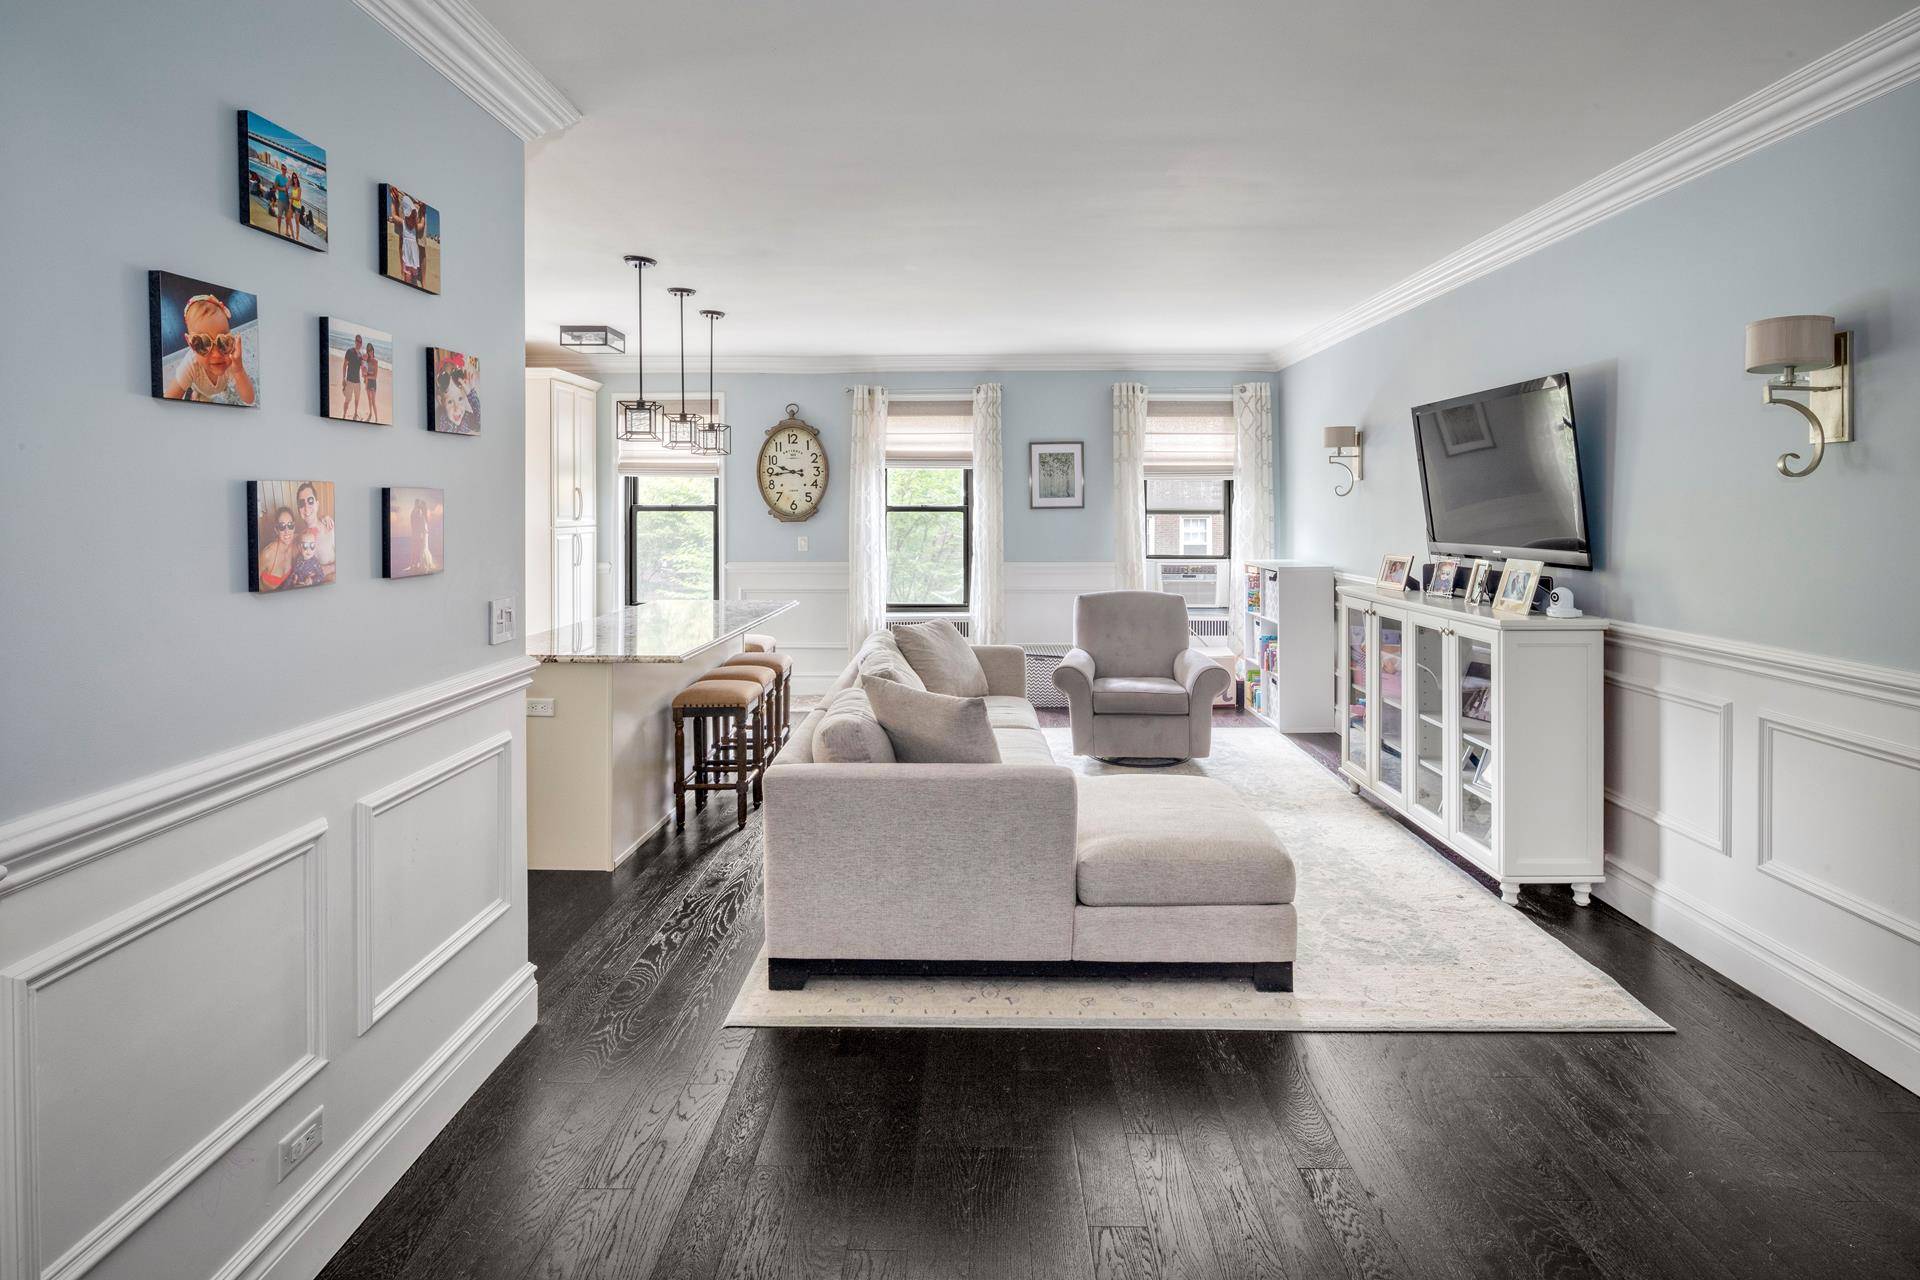 With Grand Army Plaza and Prospect Park at its doorstep, B9 at 20 Plaza Street East is a corner turnkey gem, offering exquisite renovations, lovely views and light, and prewar ...